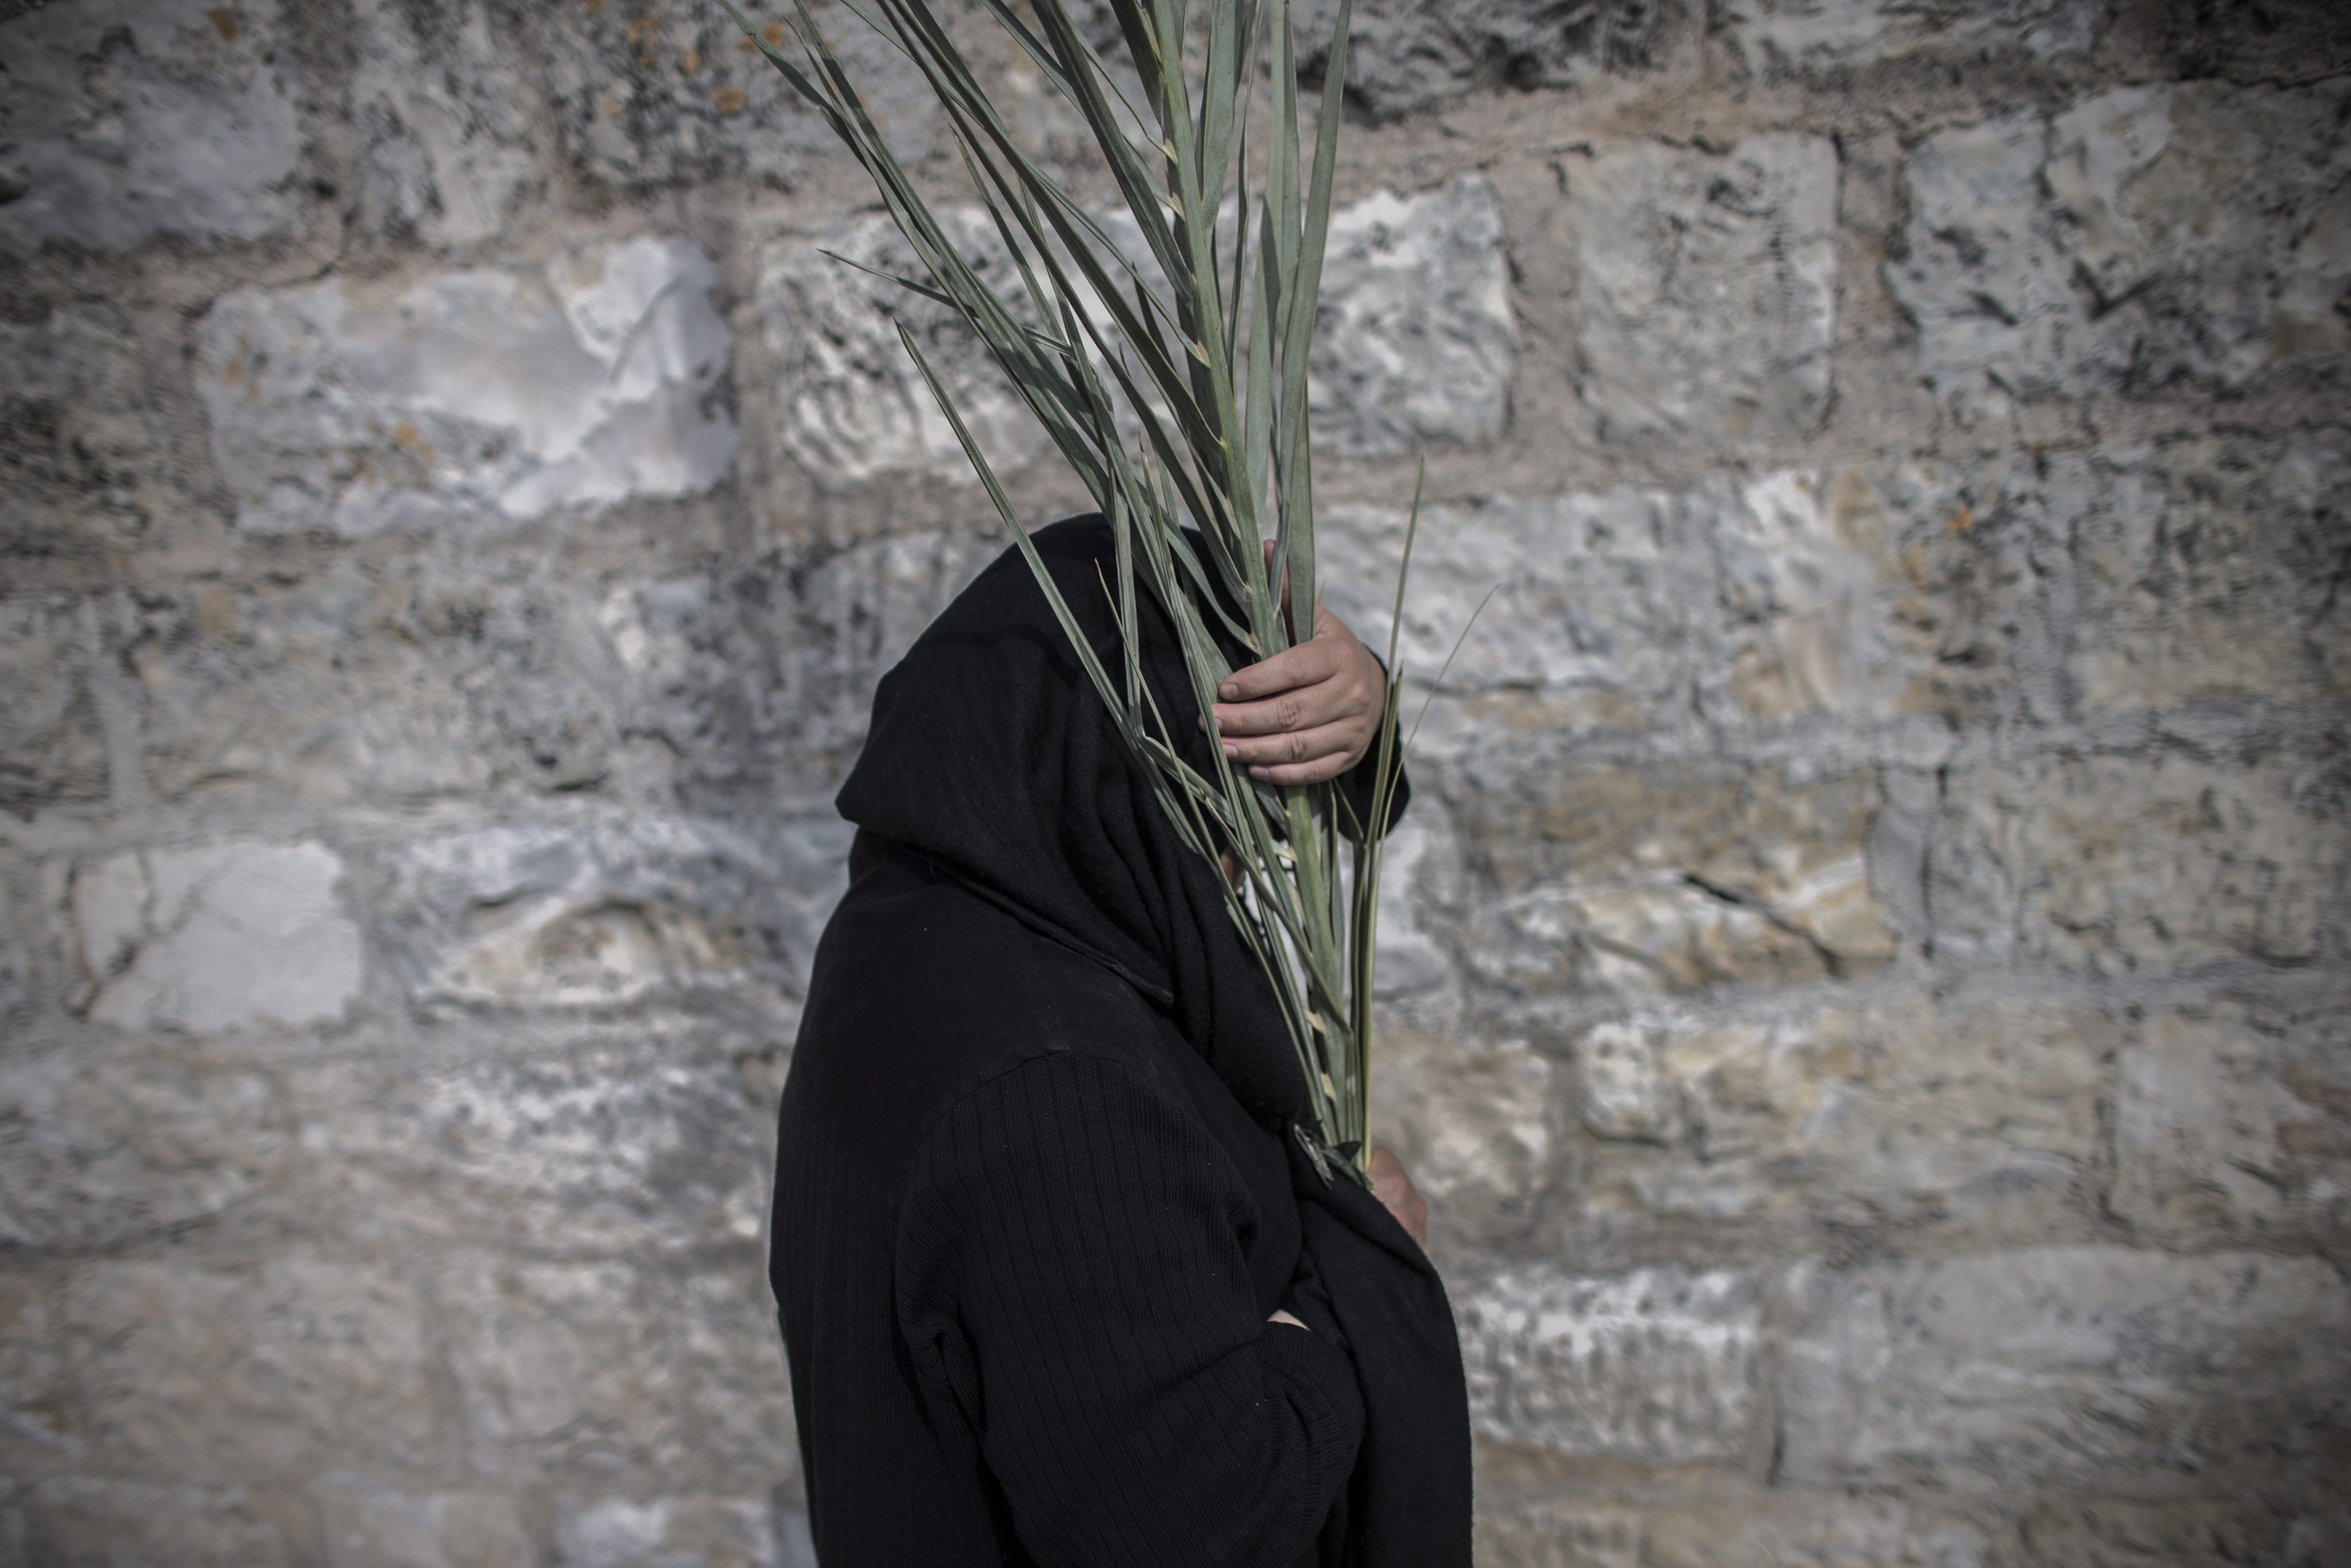 Apr. 13, 2014. A pilgrim with palm tree leafs follows the Palm Sunday procession on the Mount of Olives in Jerusalem, Israel.  Palm Sunday for Roman Catholic devotees symbolically marks the biblical account of the entry of Jesus Christ into Jerusalem, signaling the start of the Holy Week before Easter.